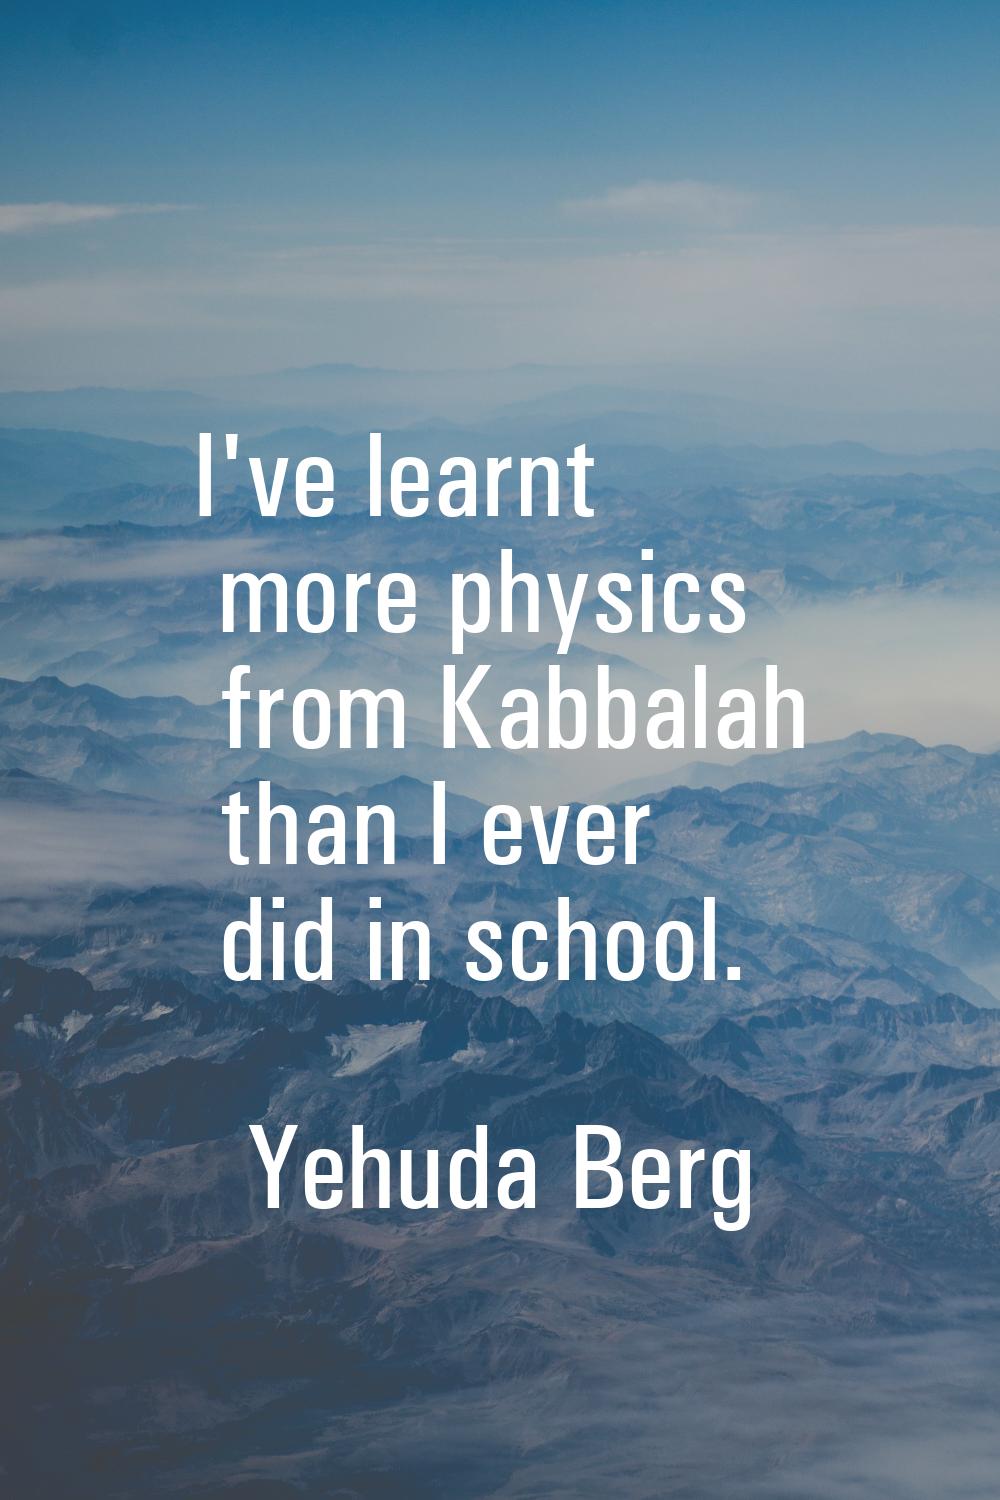 I've learnt more physics from Kabbalah than I ever did in school.